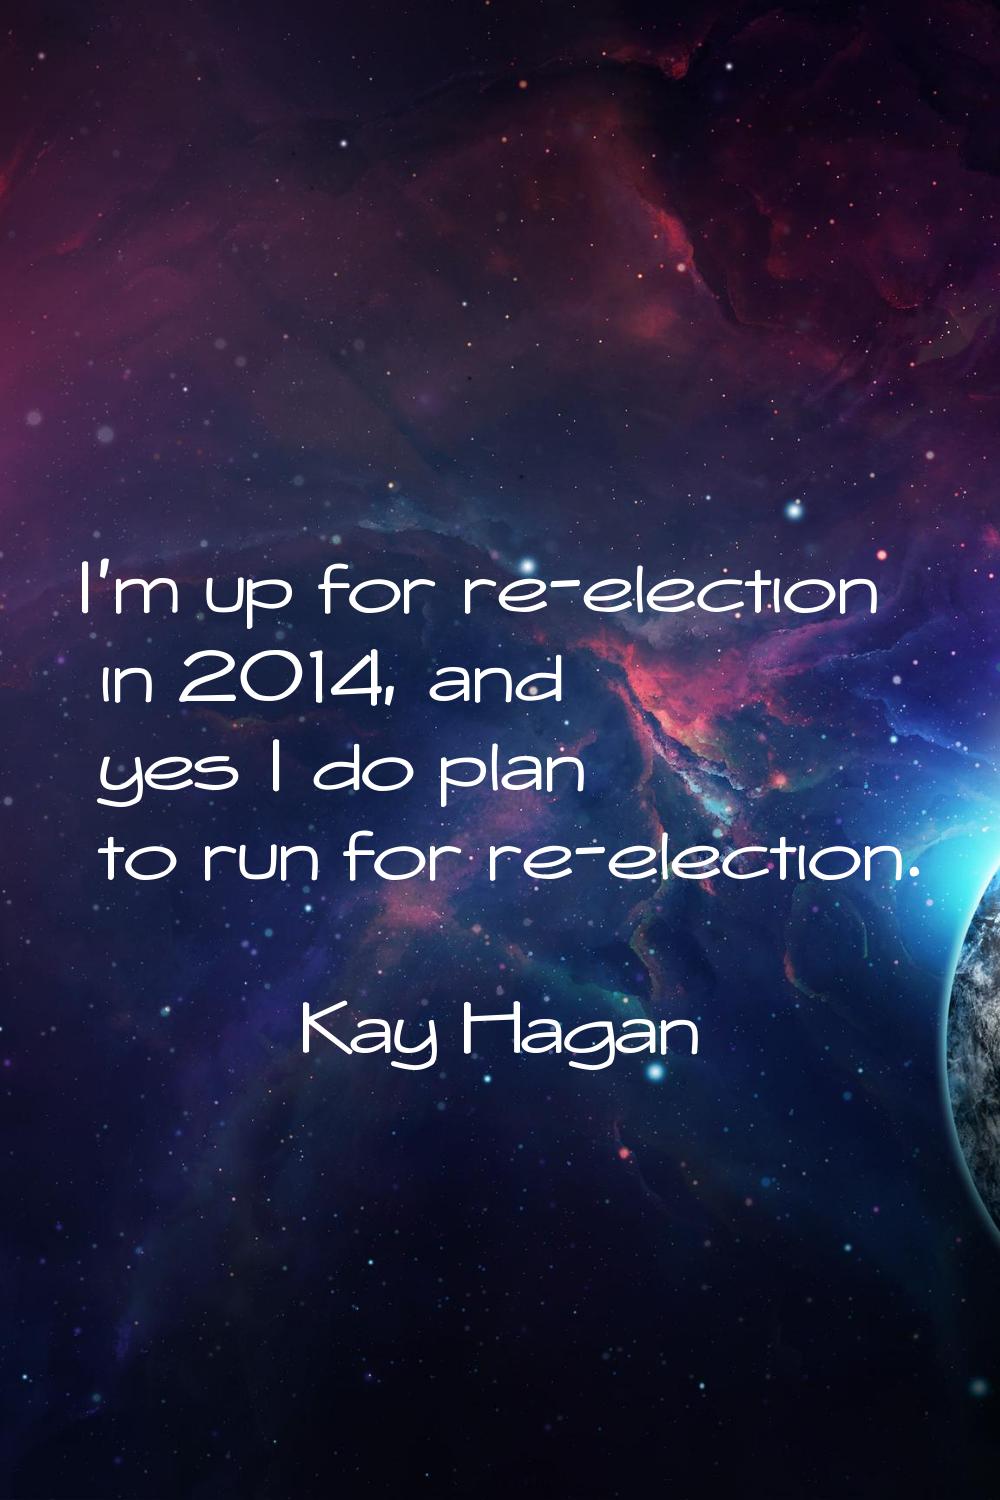 I'm up for re-election in 2014, and yes I do plan to run for re-election.